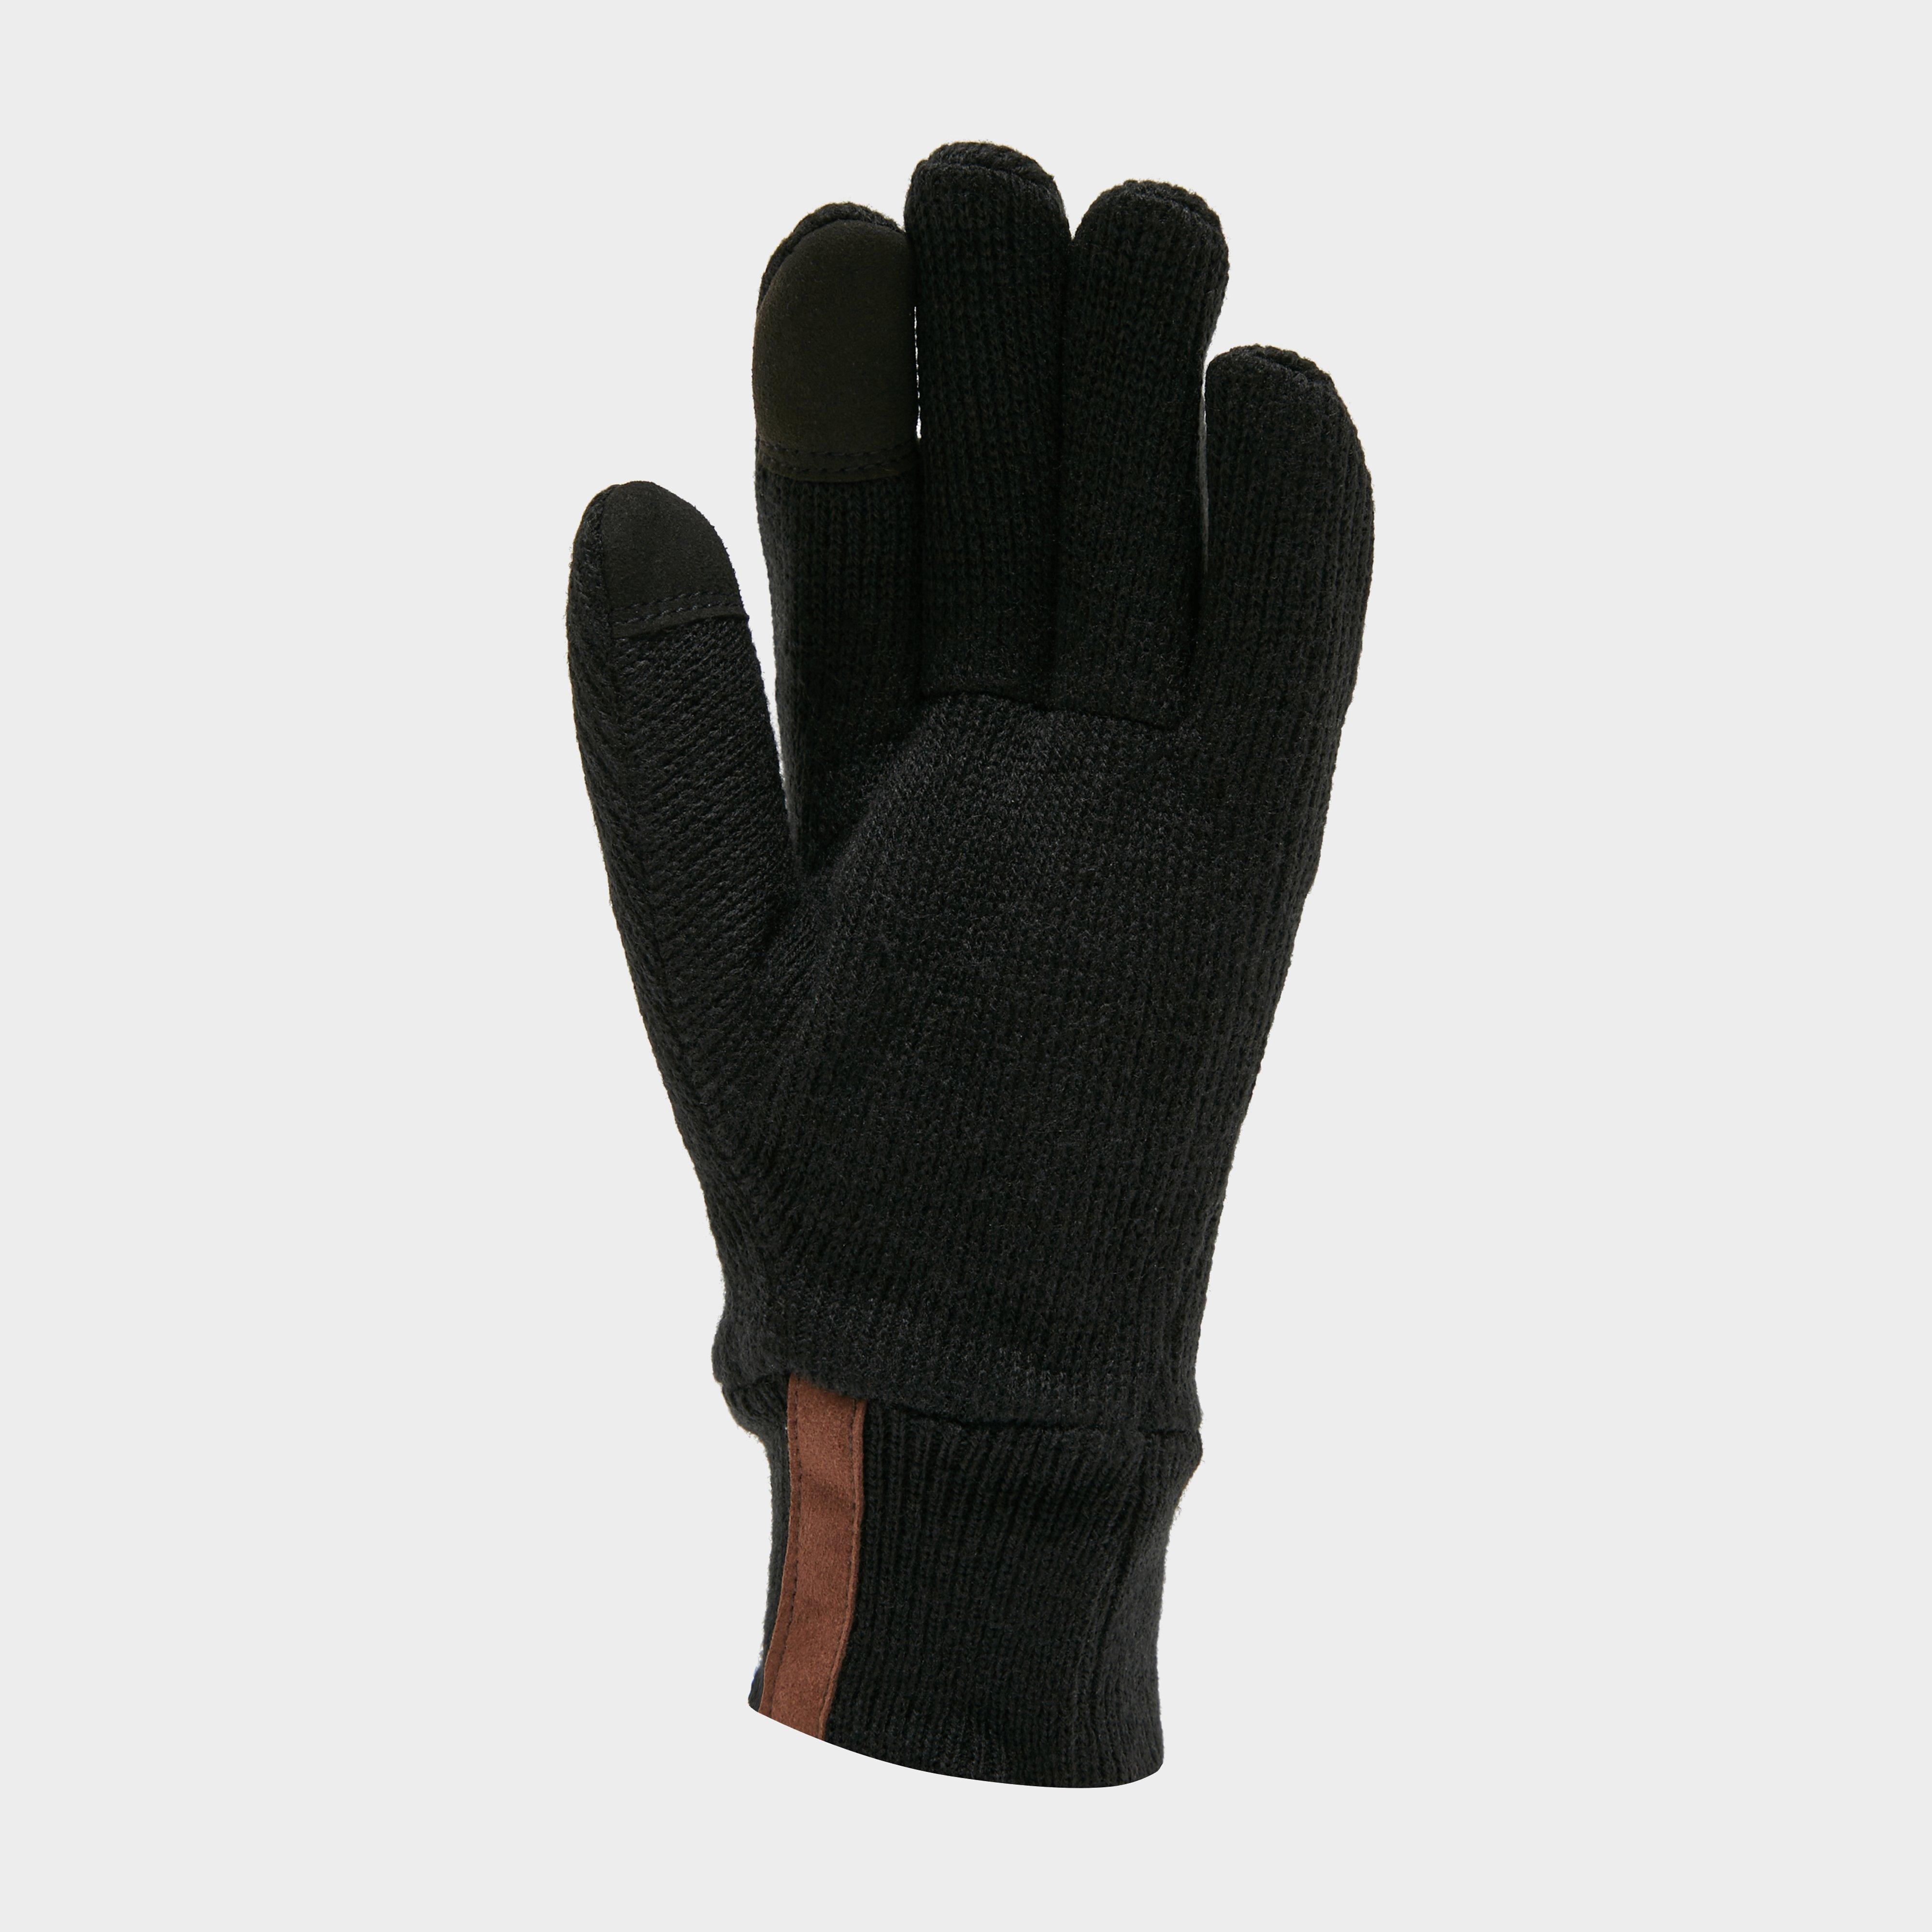 Sealskinz Windproof All Weather Knitted Gloves Review